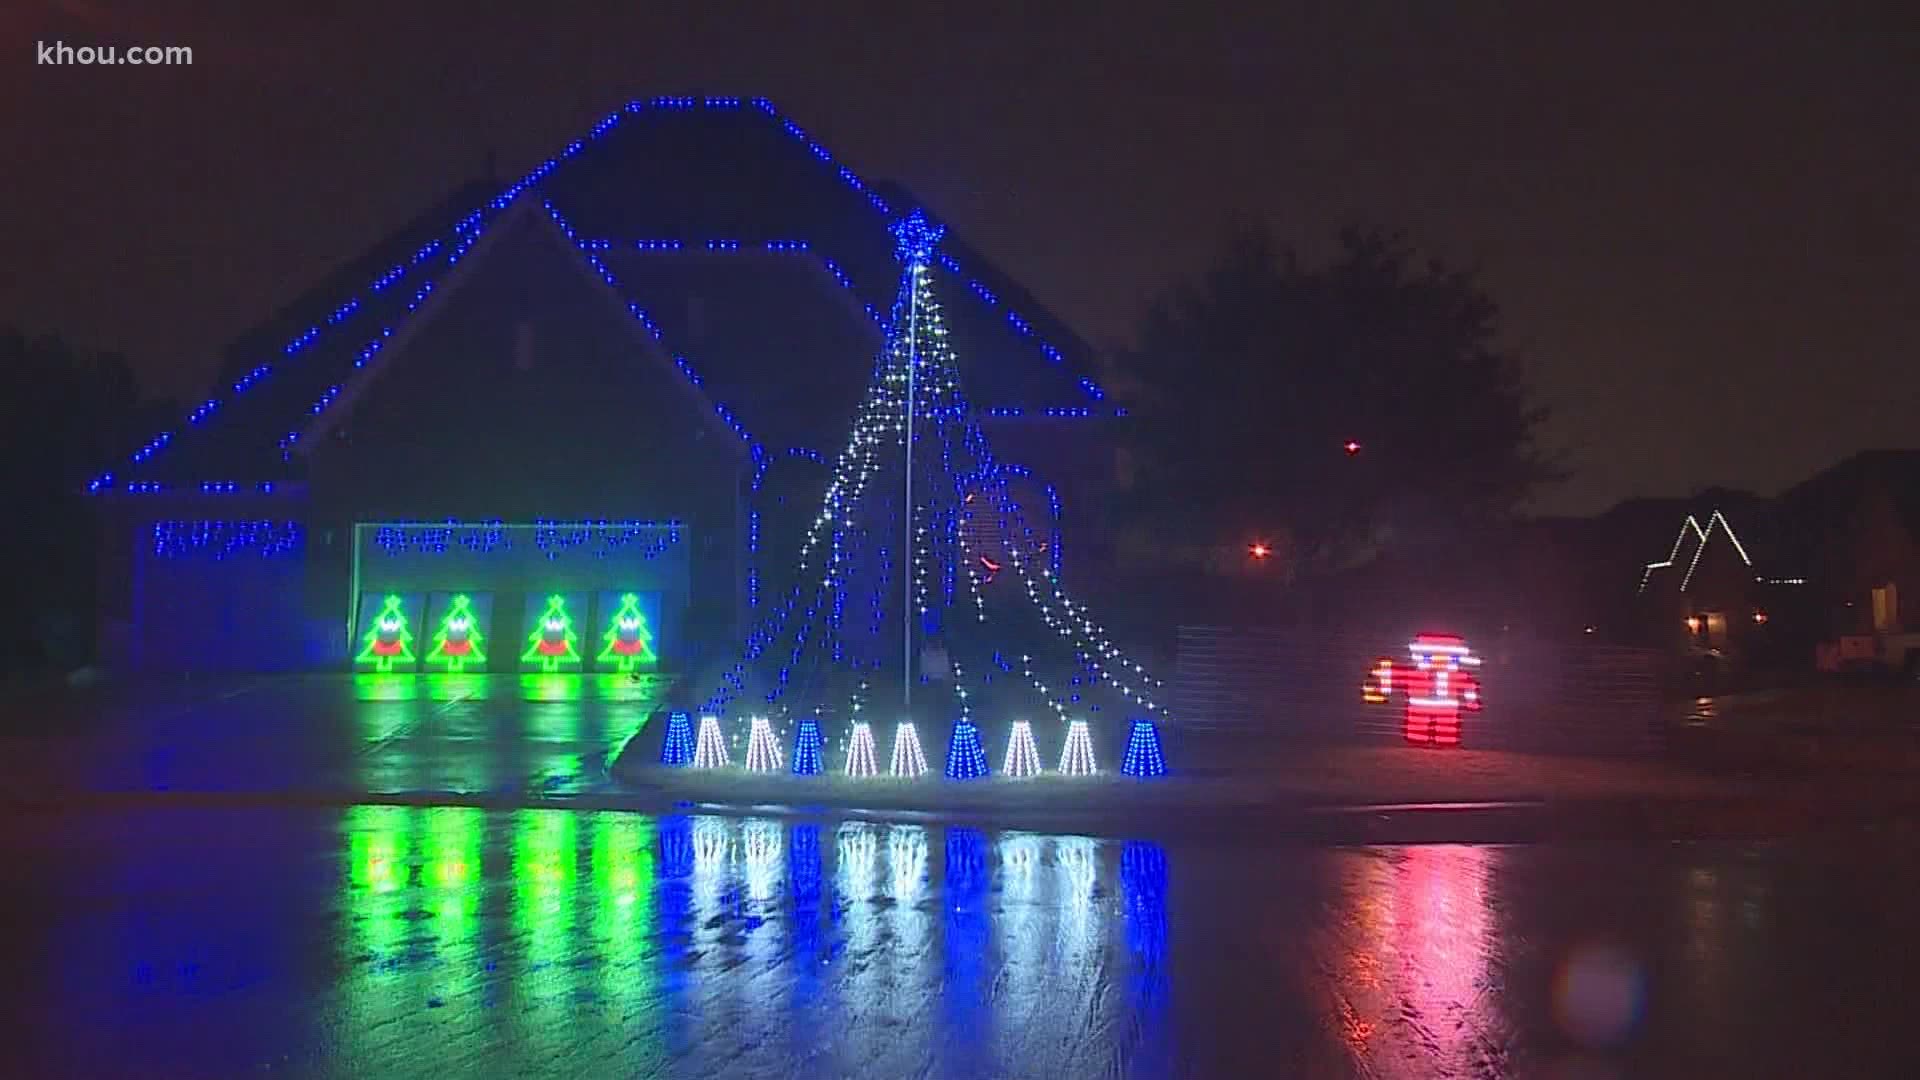 A proud Houstonian is going viral on social media for his holiday lights display.